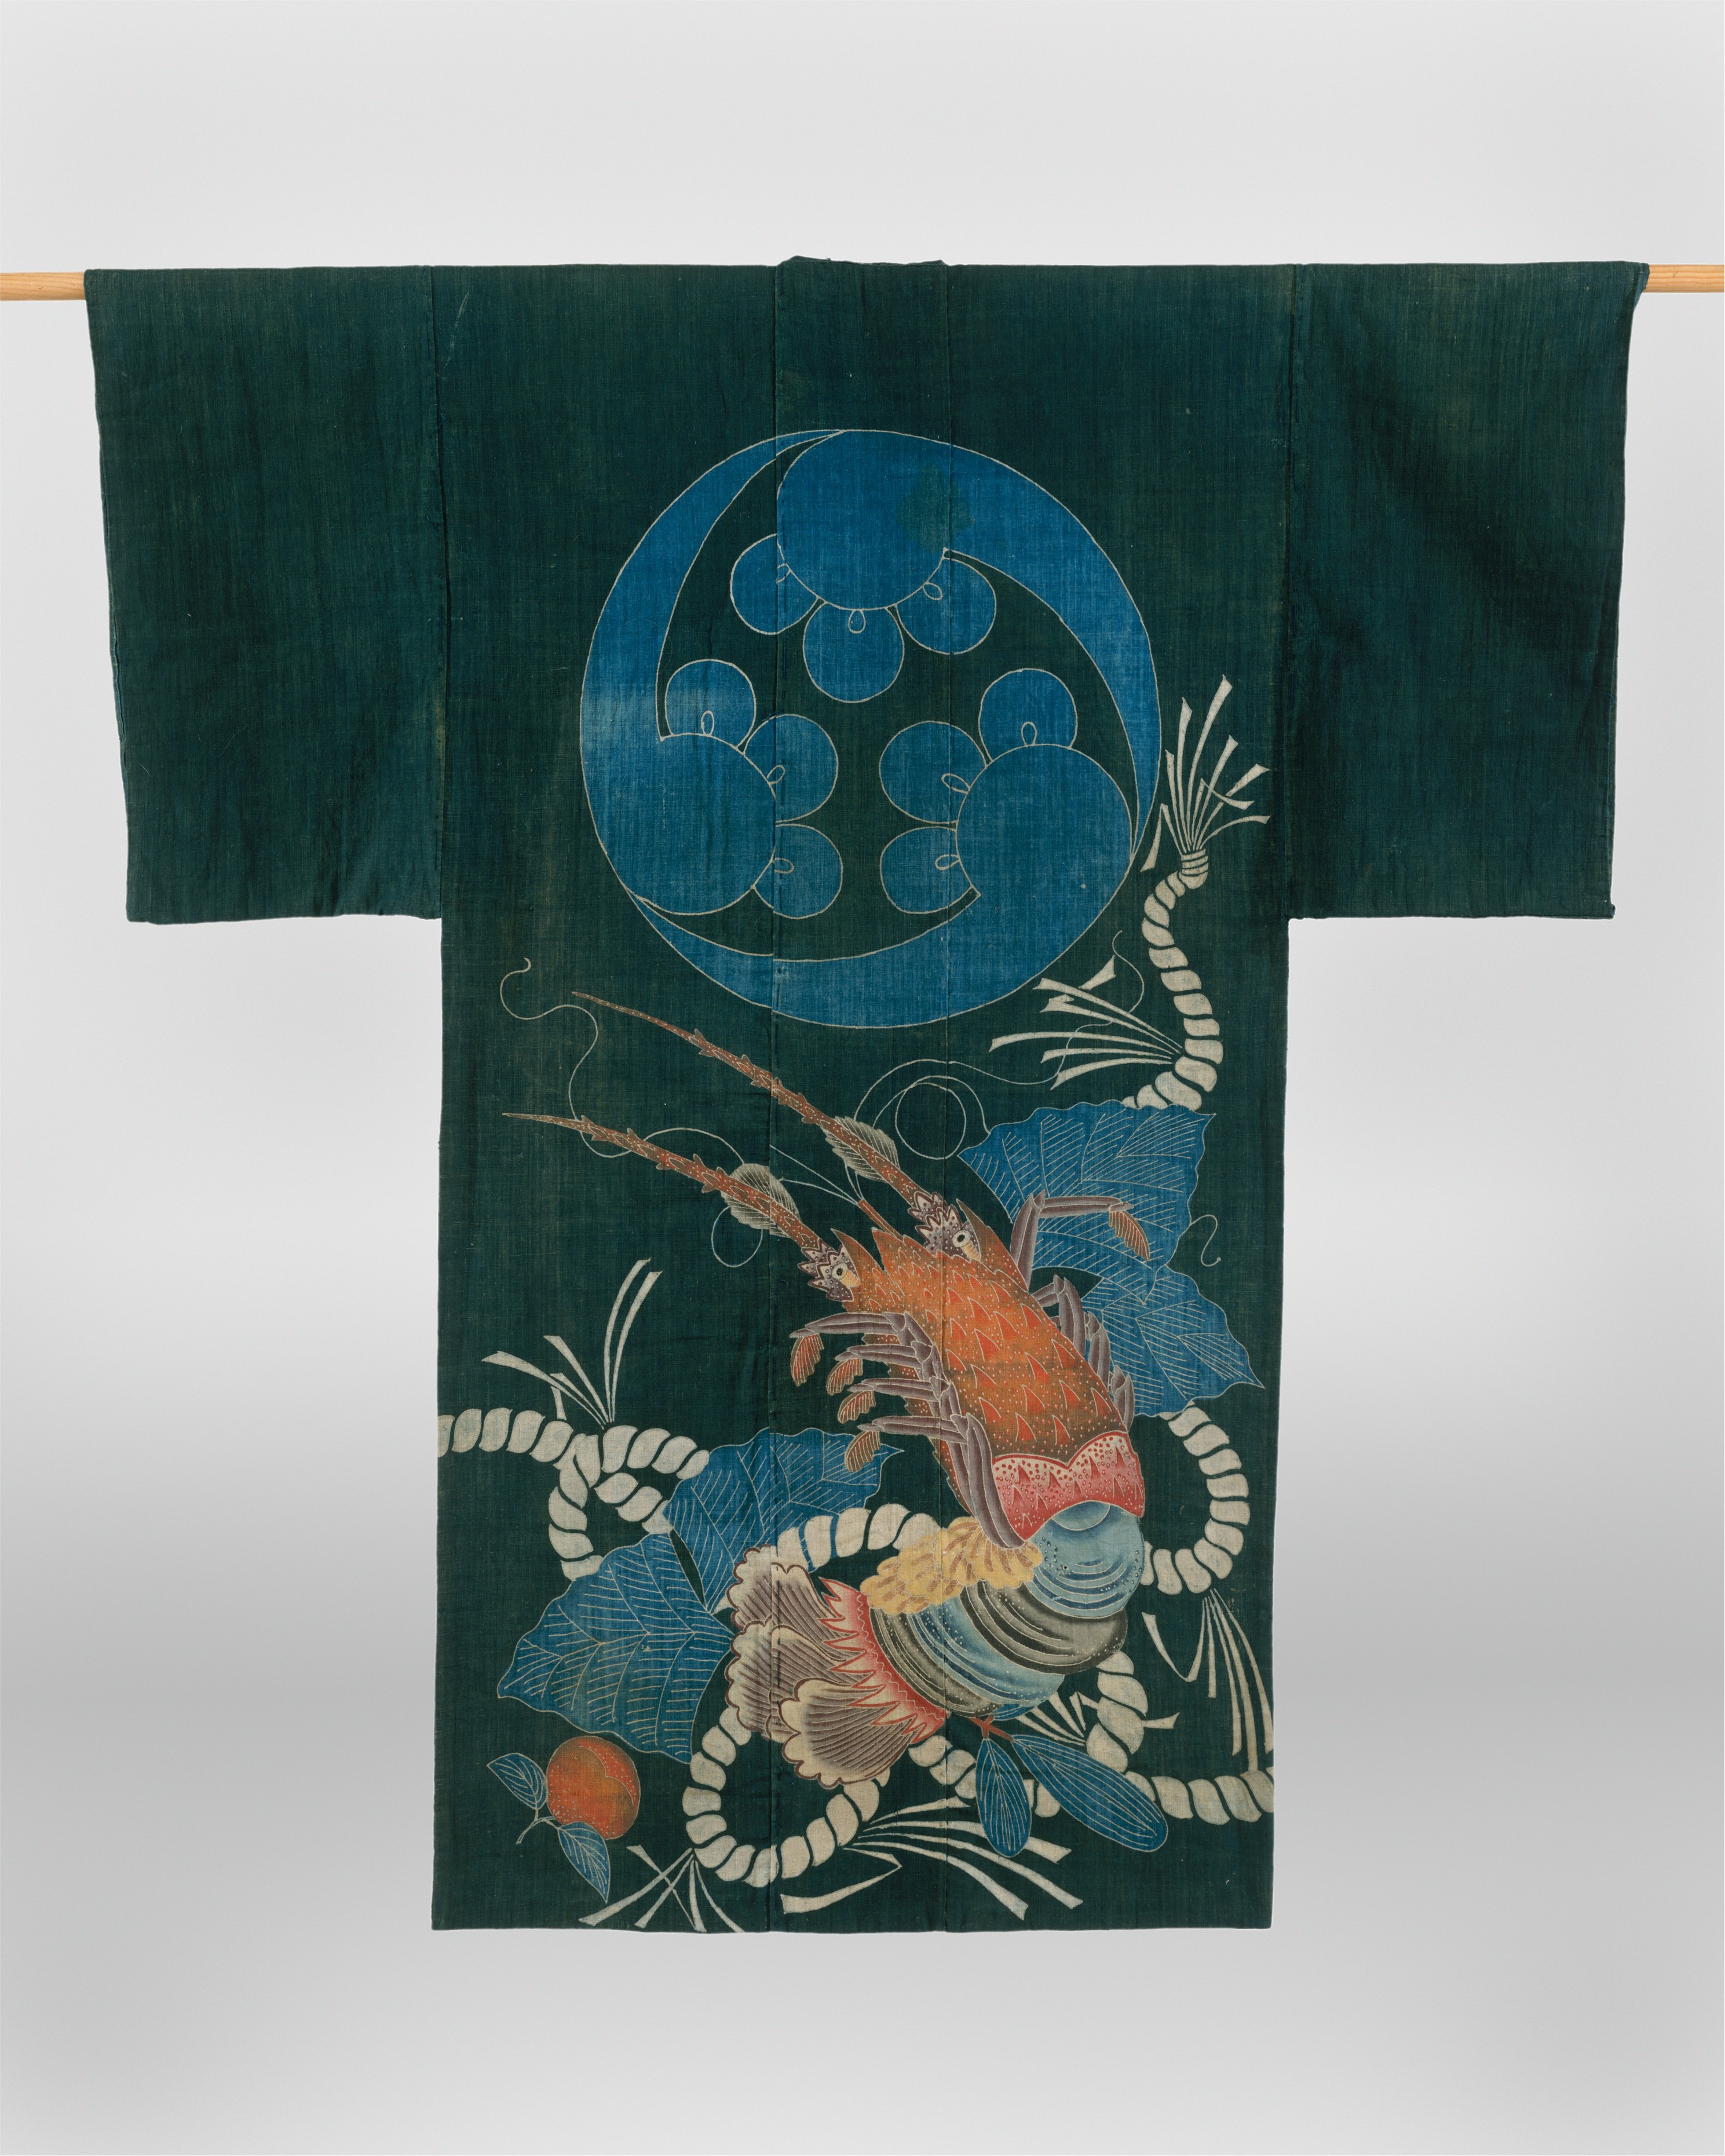 | (Yogi) Kimono-Shaped Meiji Coverlet of | Crest The Japan Museum (1868–1912) | Art Metropolitan period and Lobster with